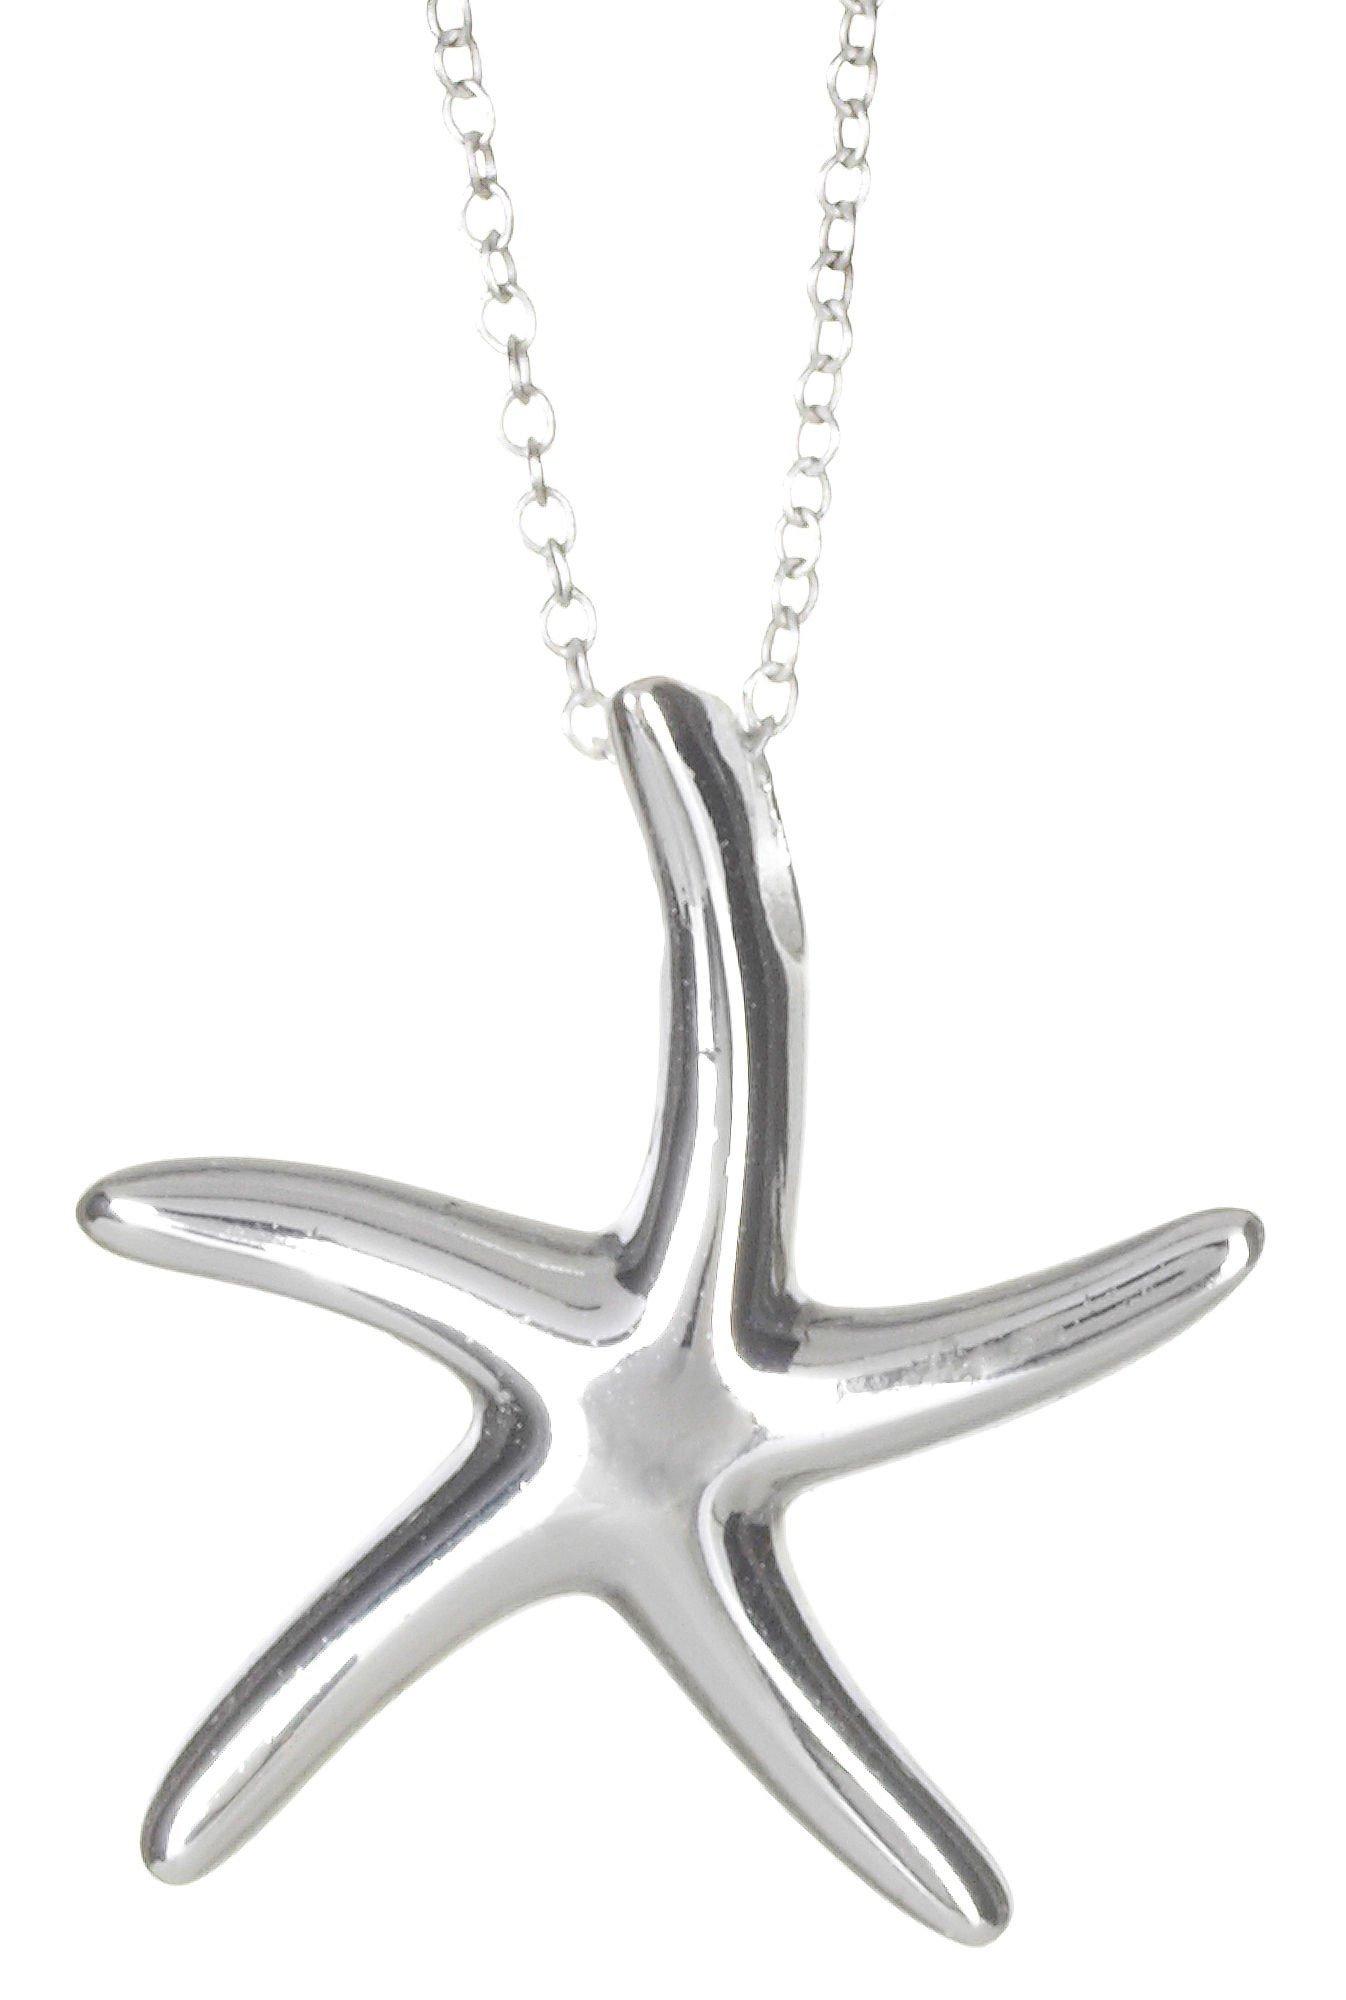 Piper & Taylor Starfish Pendant Necklace